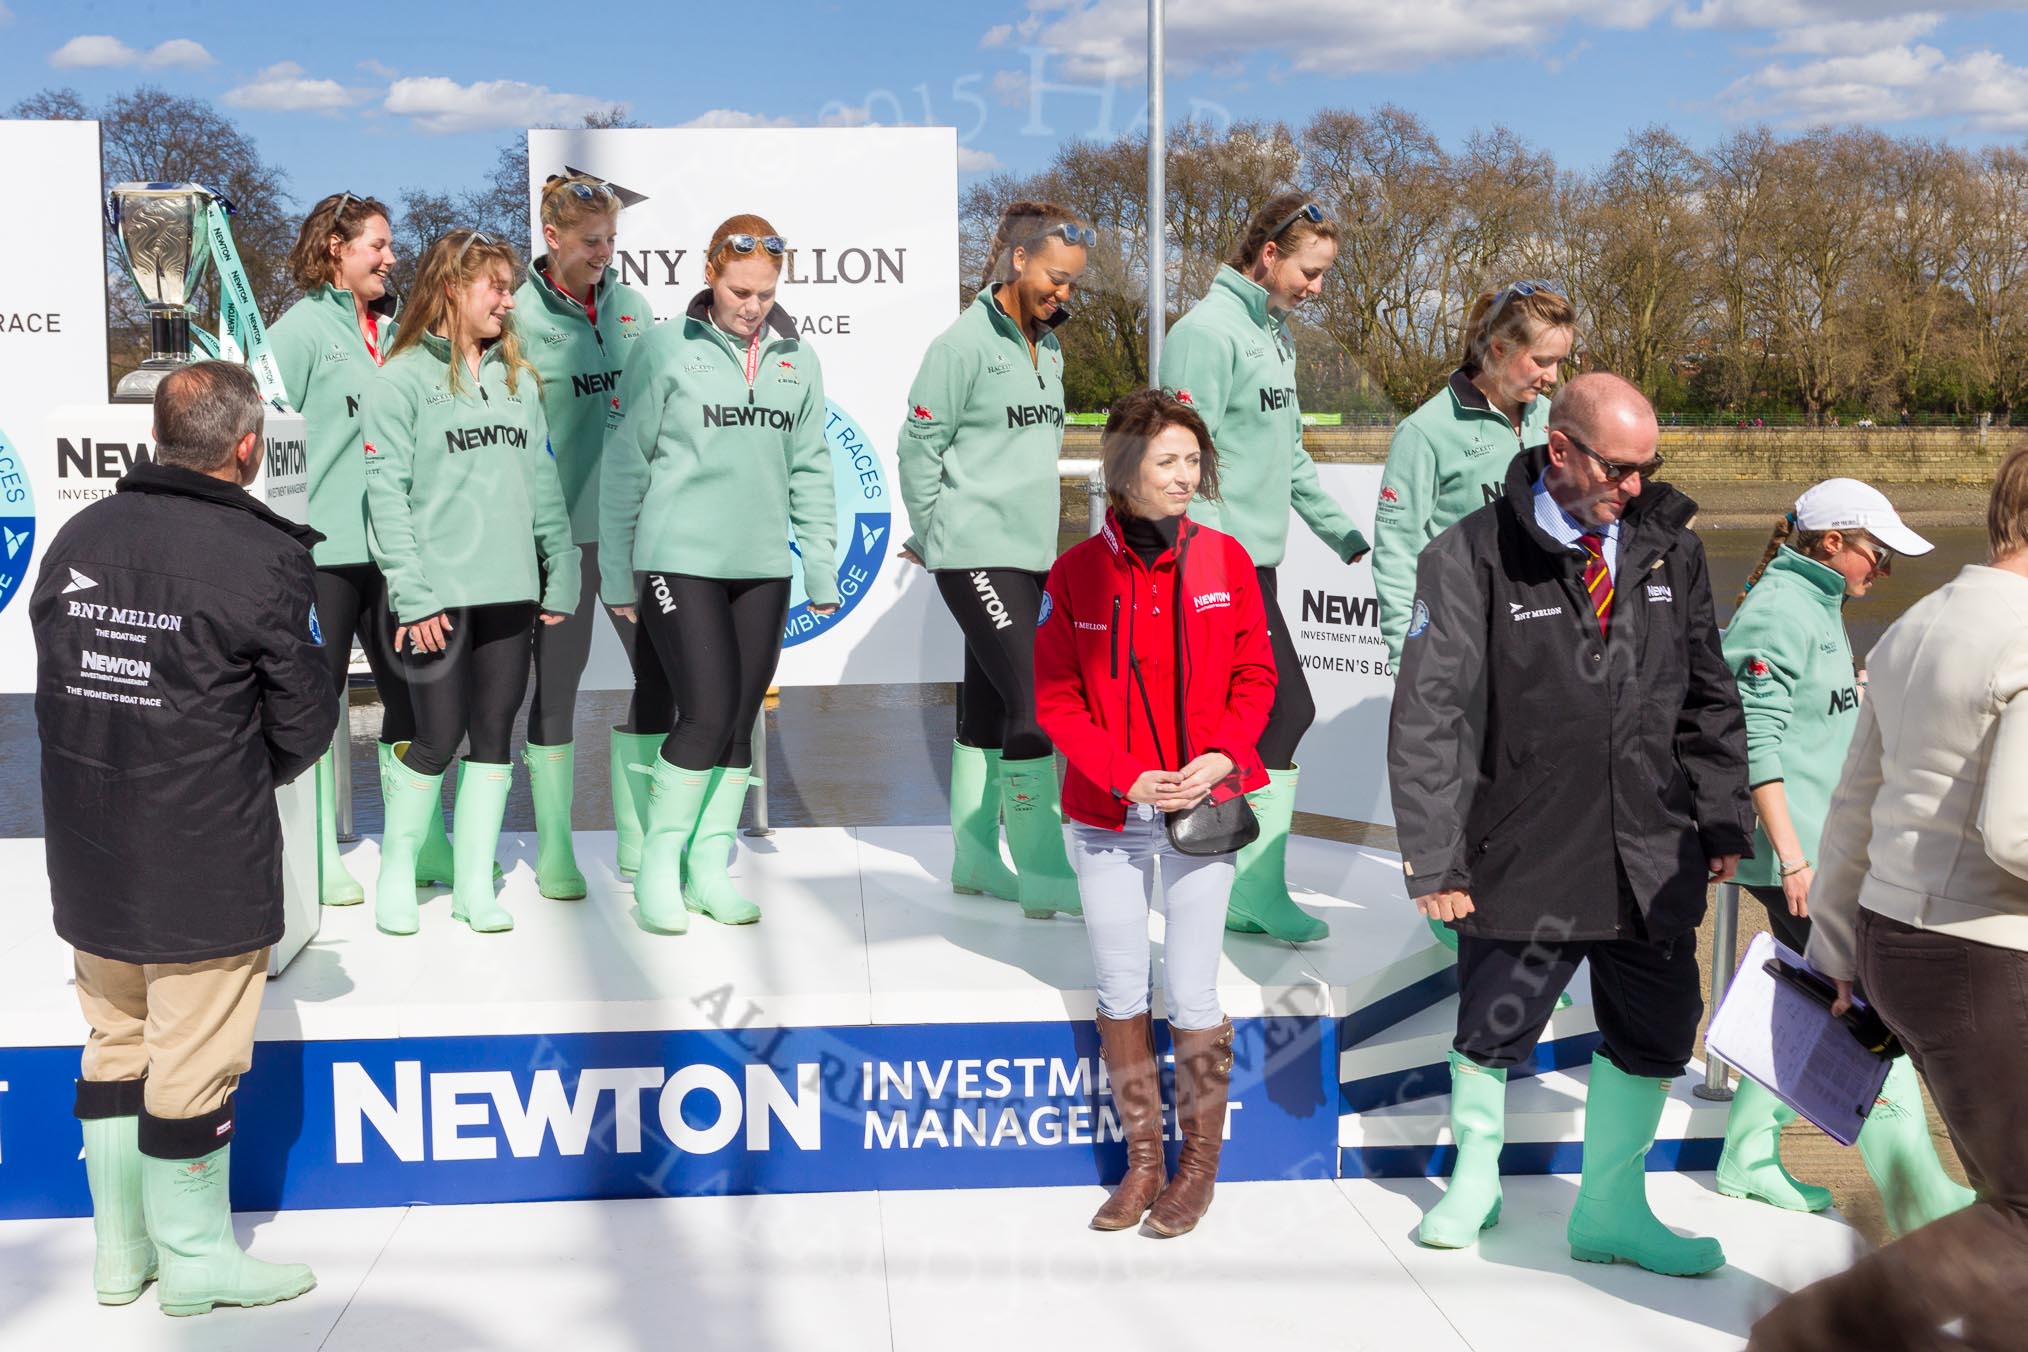 The Boat Race season 2015 - Newton Women's Boat Race.
River Thames between Putney and Mortlake,
London,

United Kingdom,
on 11 April 2015 at 15:01, image #50